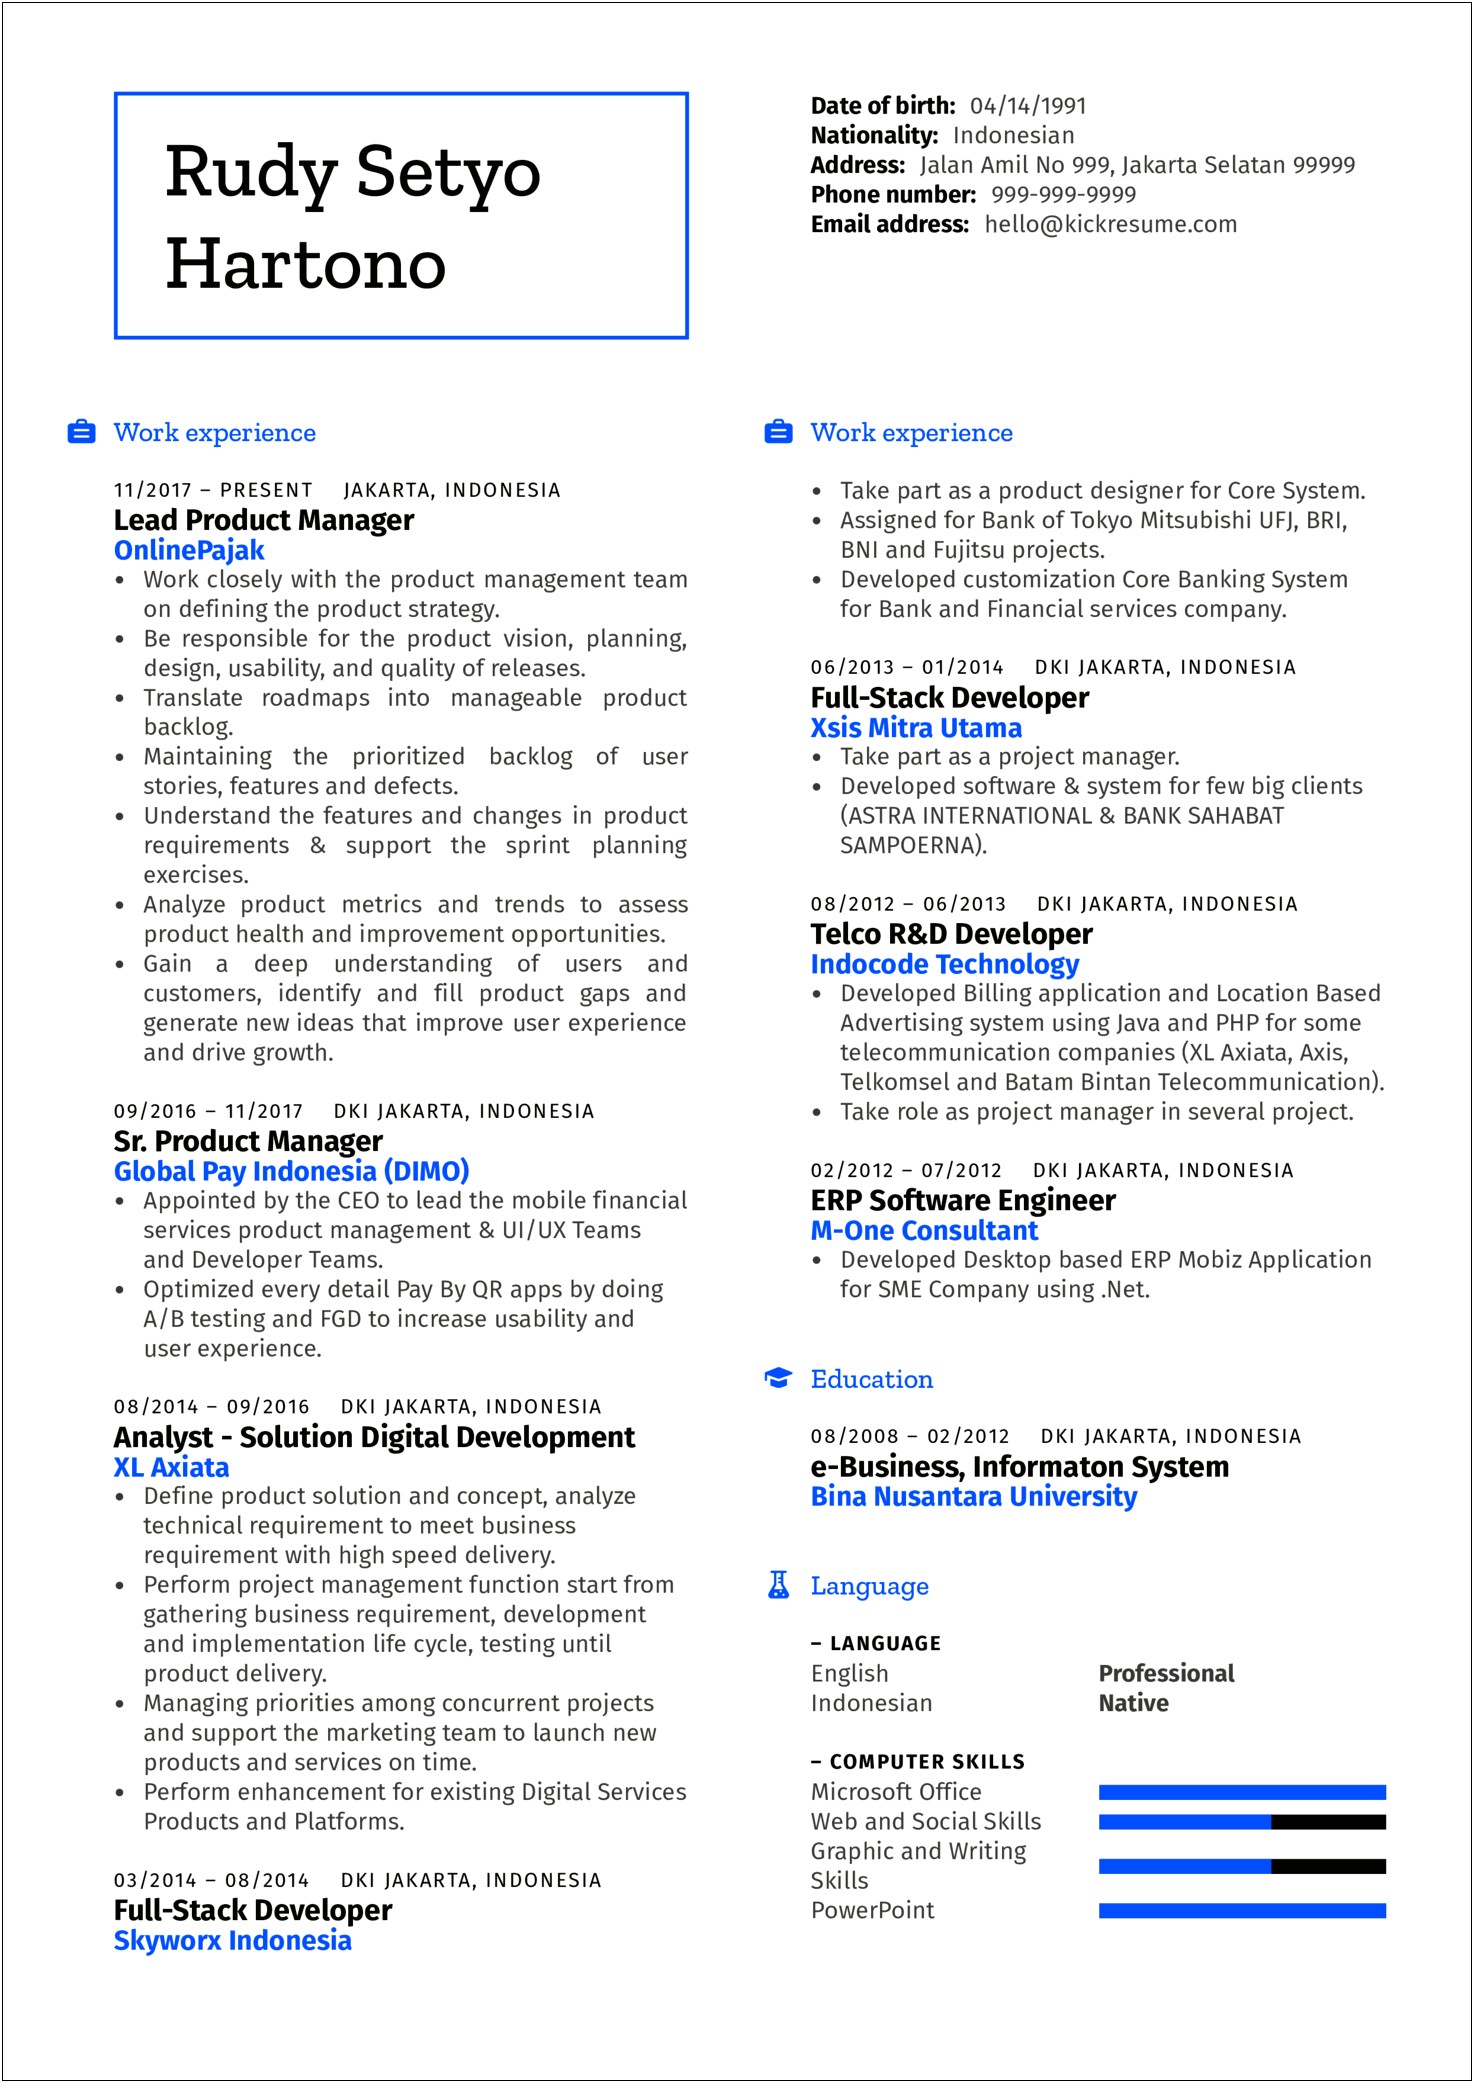 Help With Resume Copy And Paste Skills